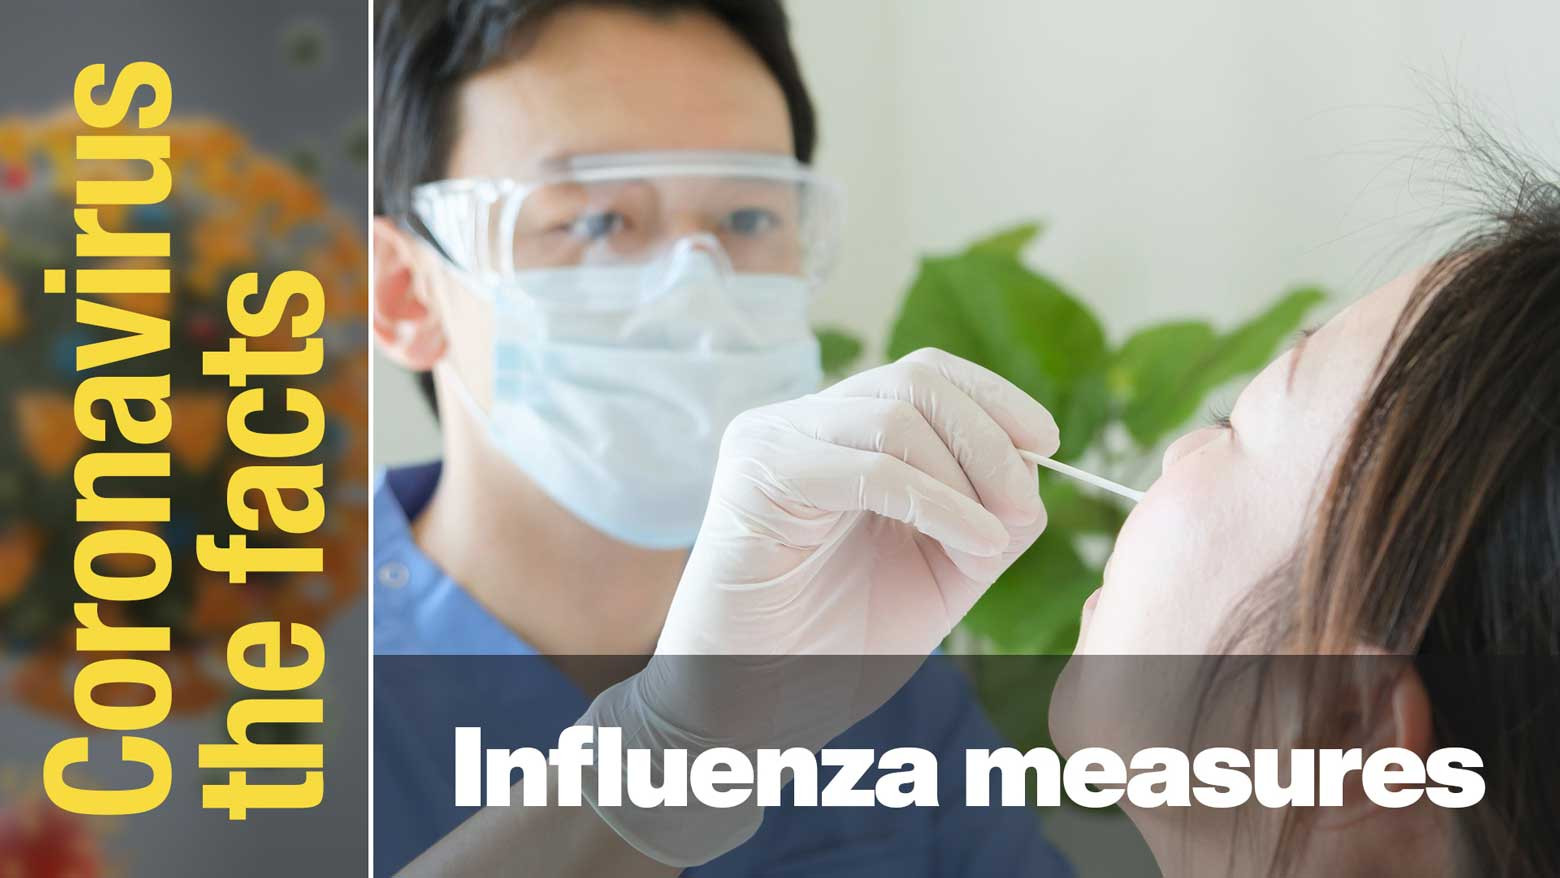 How will Japan deal with both the flu and coronavirus?